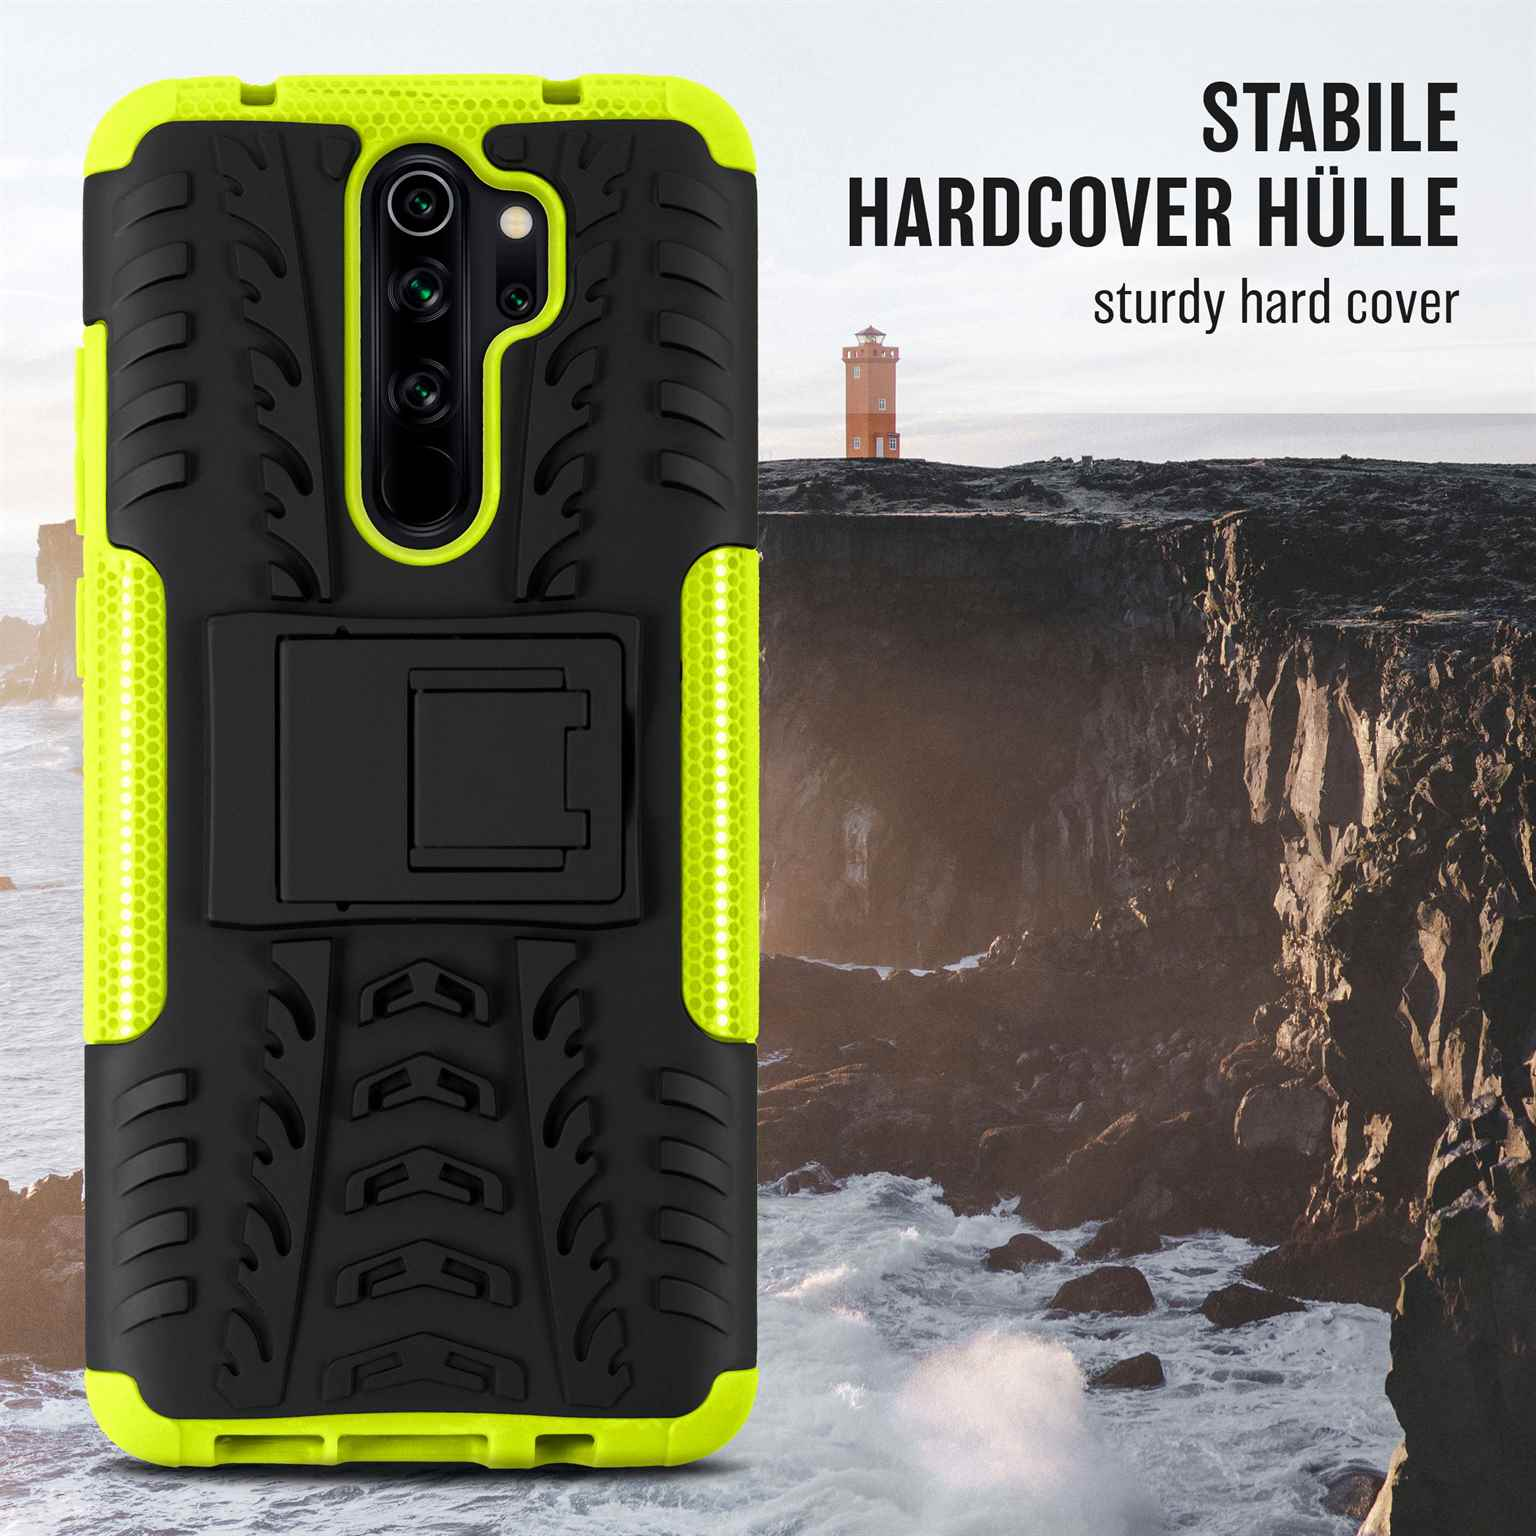 ONEFLOW Tank Case, Redmi Xiaomi, 8 Lime Note Pro, Backcover